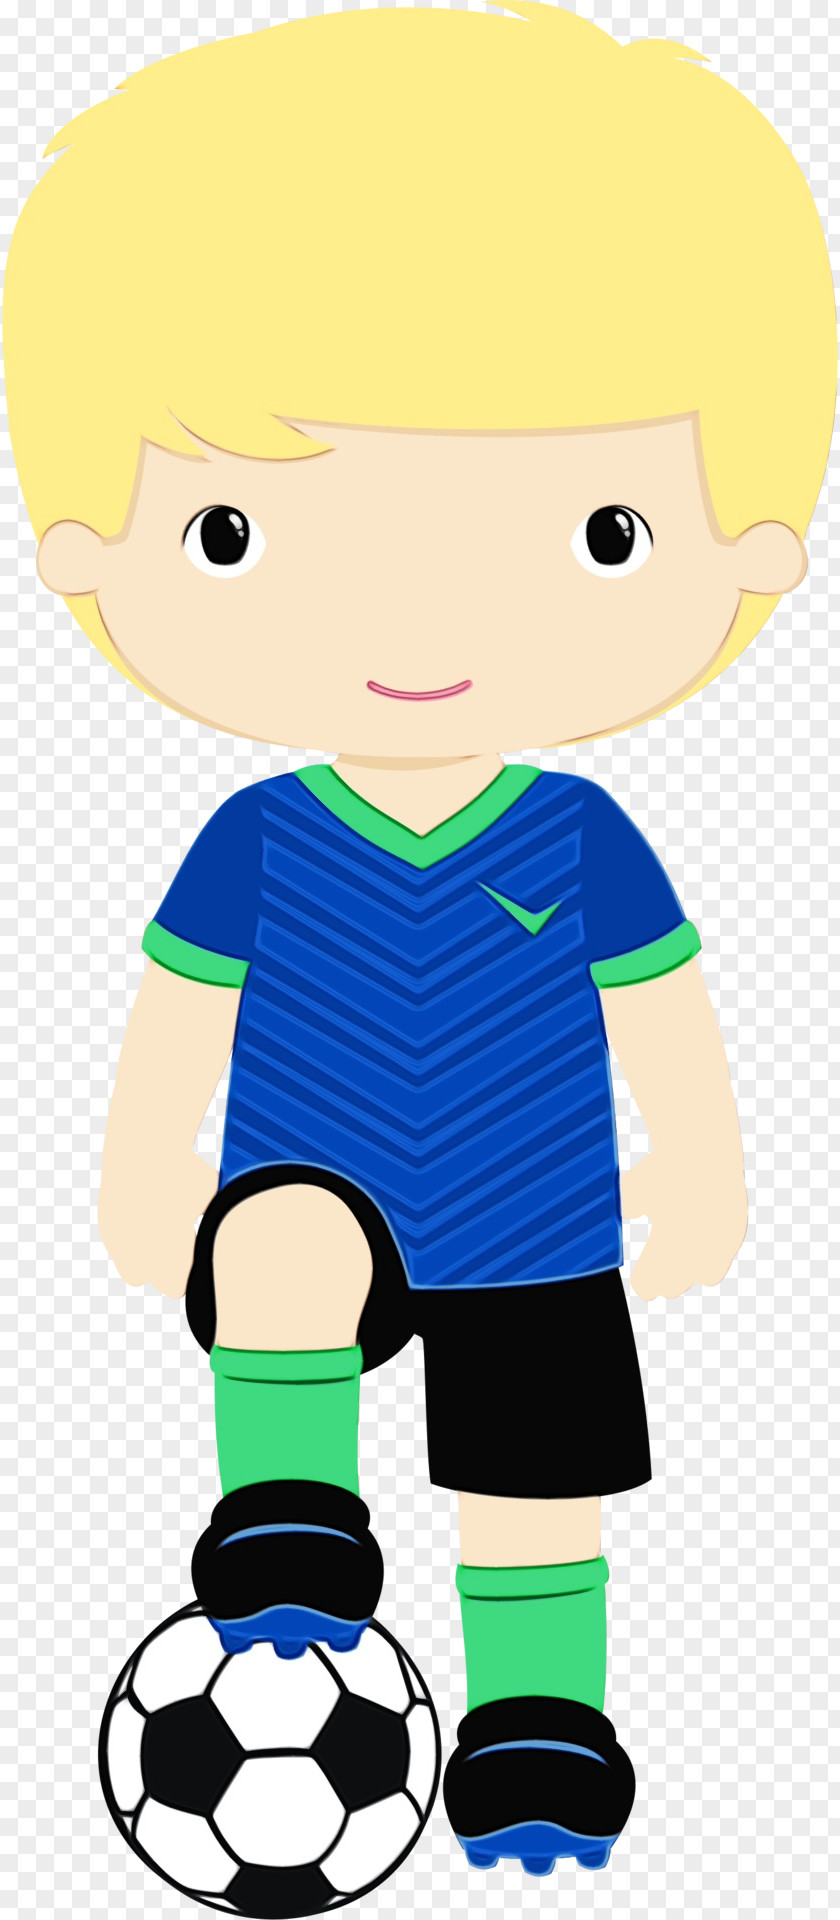 Style Doll Football Background PNG